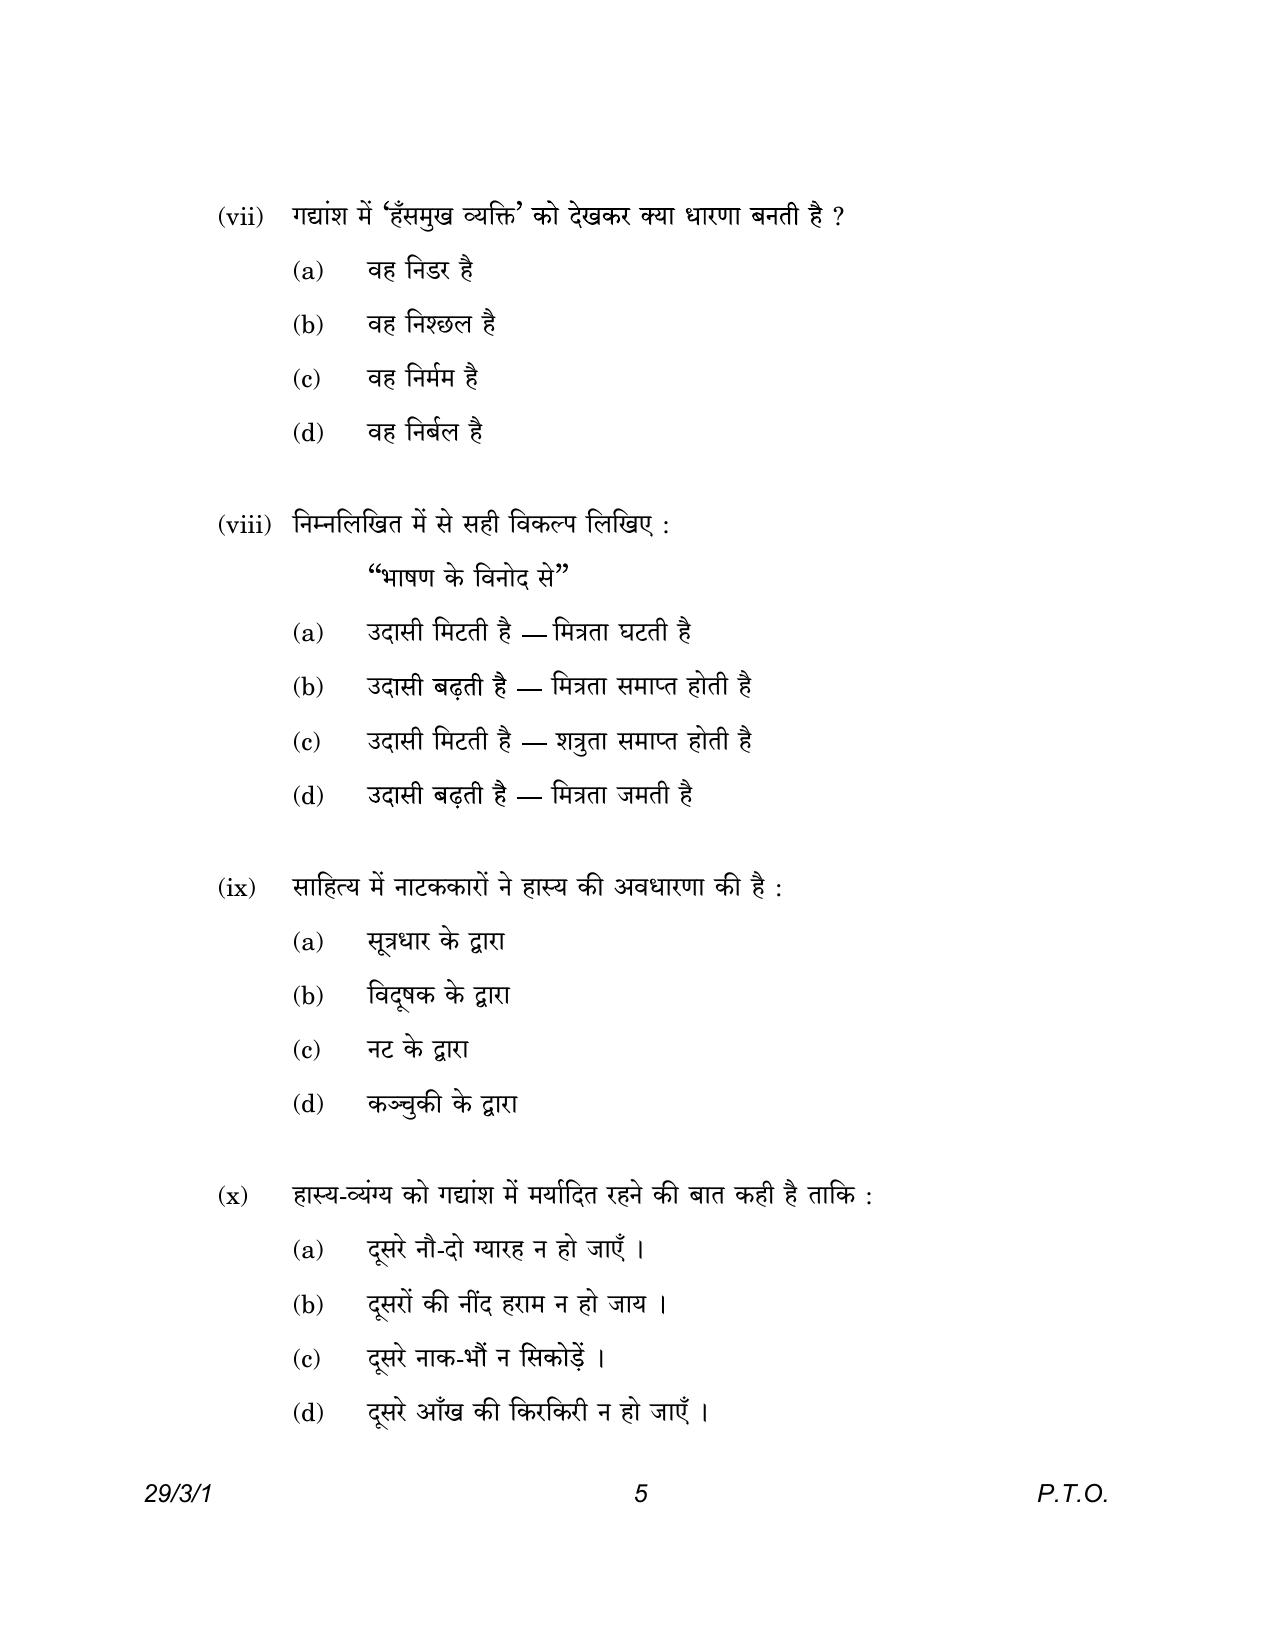 CBSE Class 12 29-3-1 Hindi Elective 2023 Question Paper - Page 5